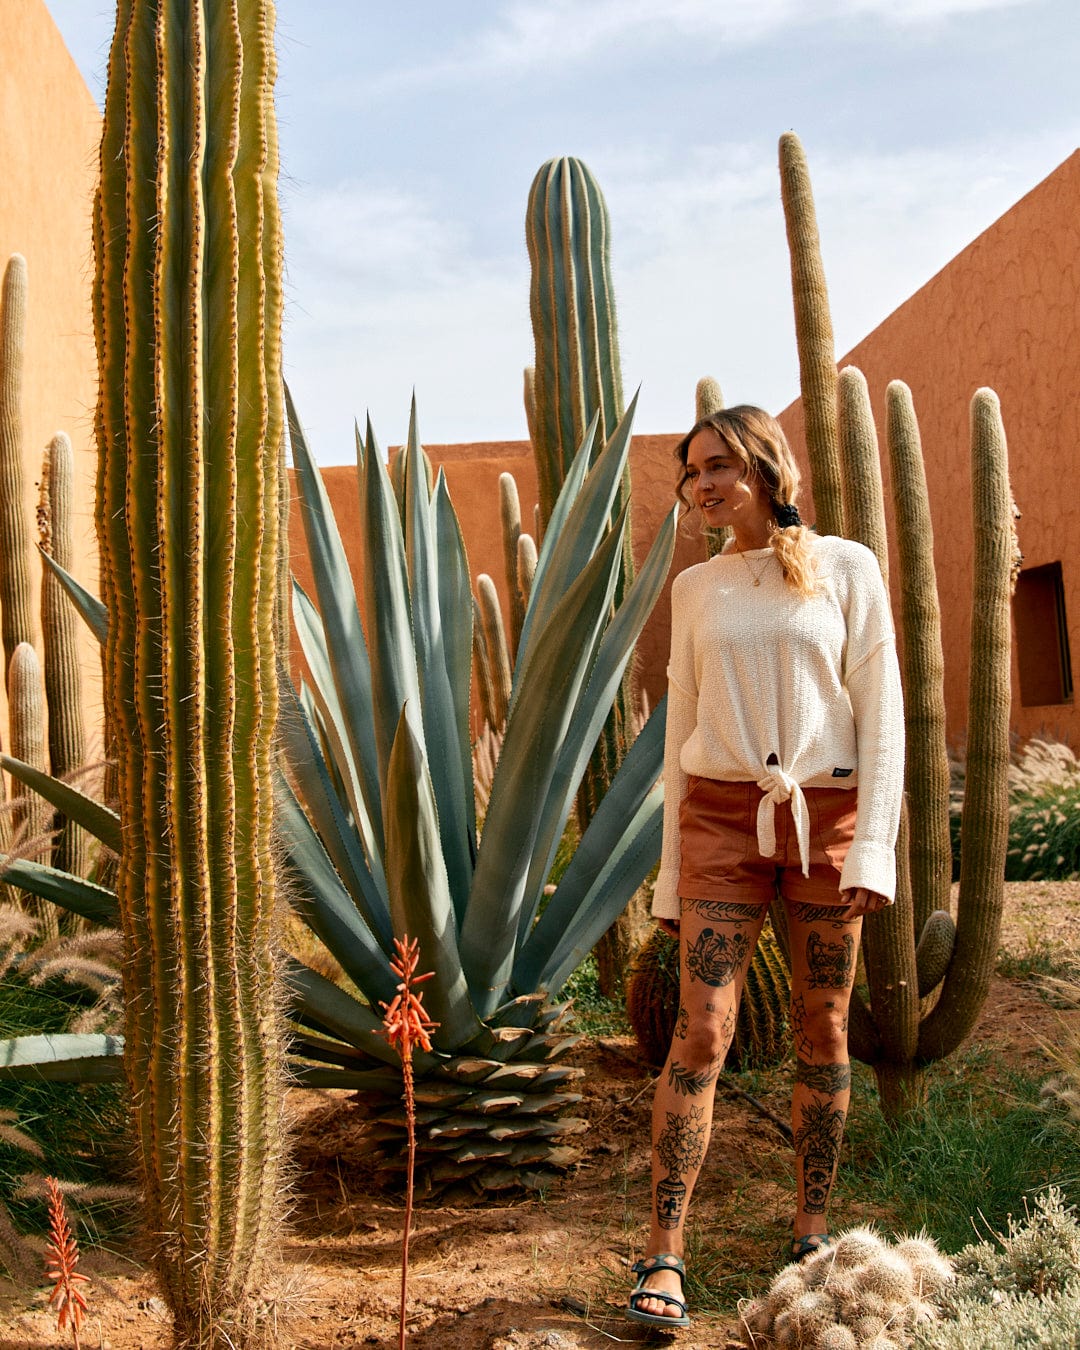 A woman in a Saltrock Beachcomber - Womens Tie Waist Jumper in Cream and patterned leggings smiles while standing near tall cacti in a desert garden.